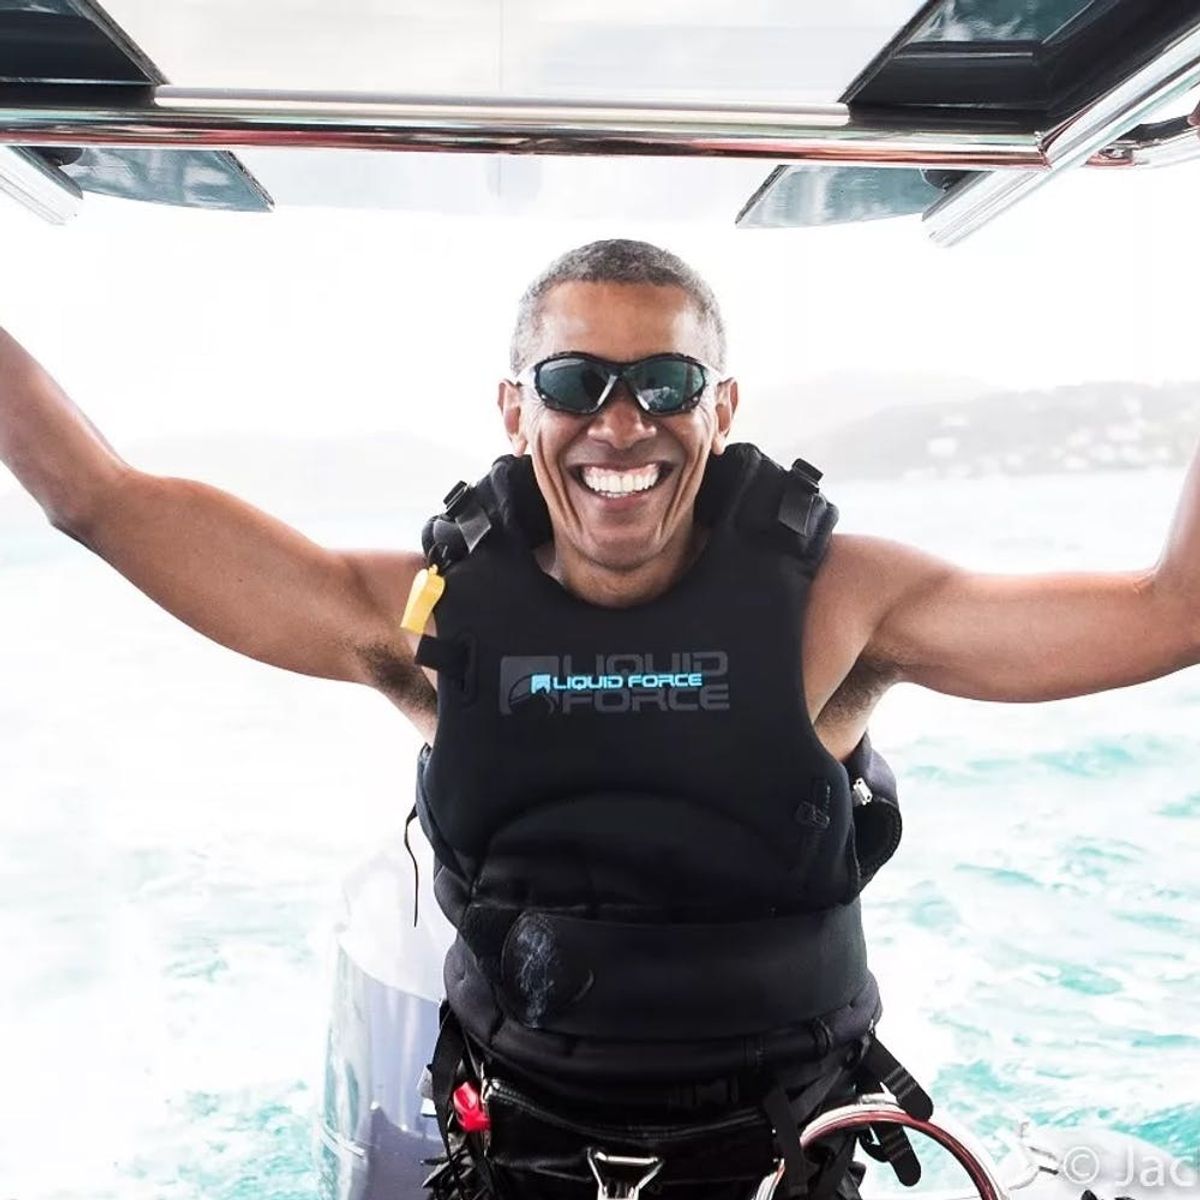 Obama’s Trip to Richard Branson’s Private Island Included an Epic Kiteboarding Competition